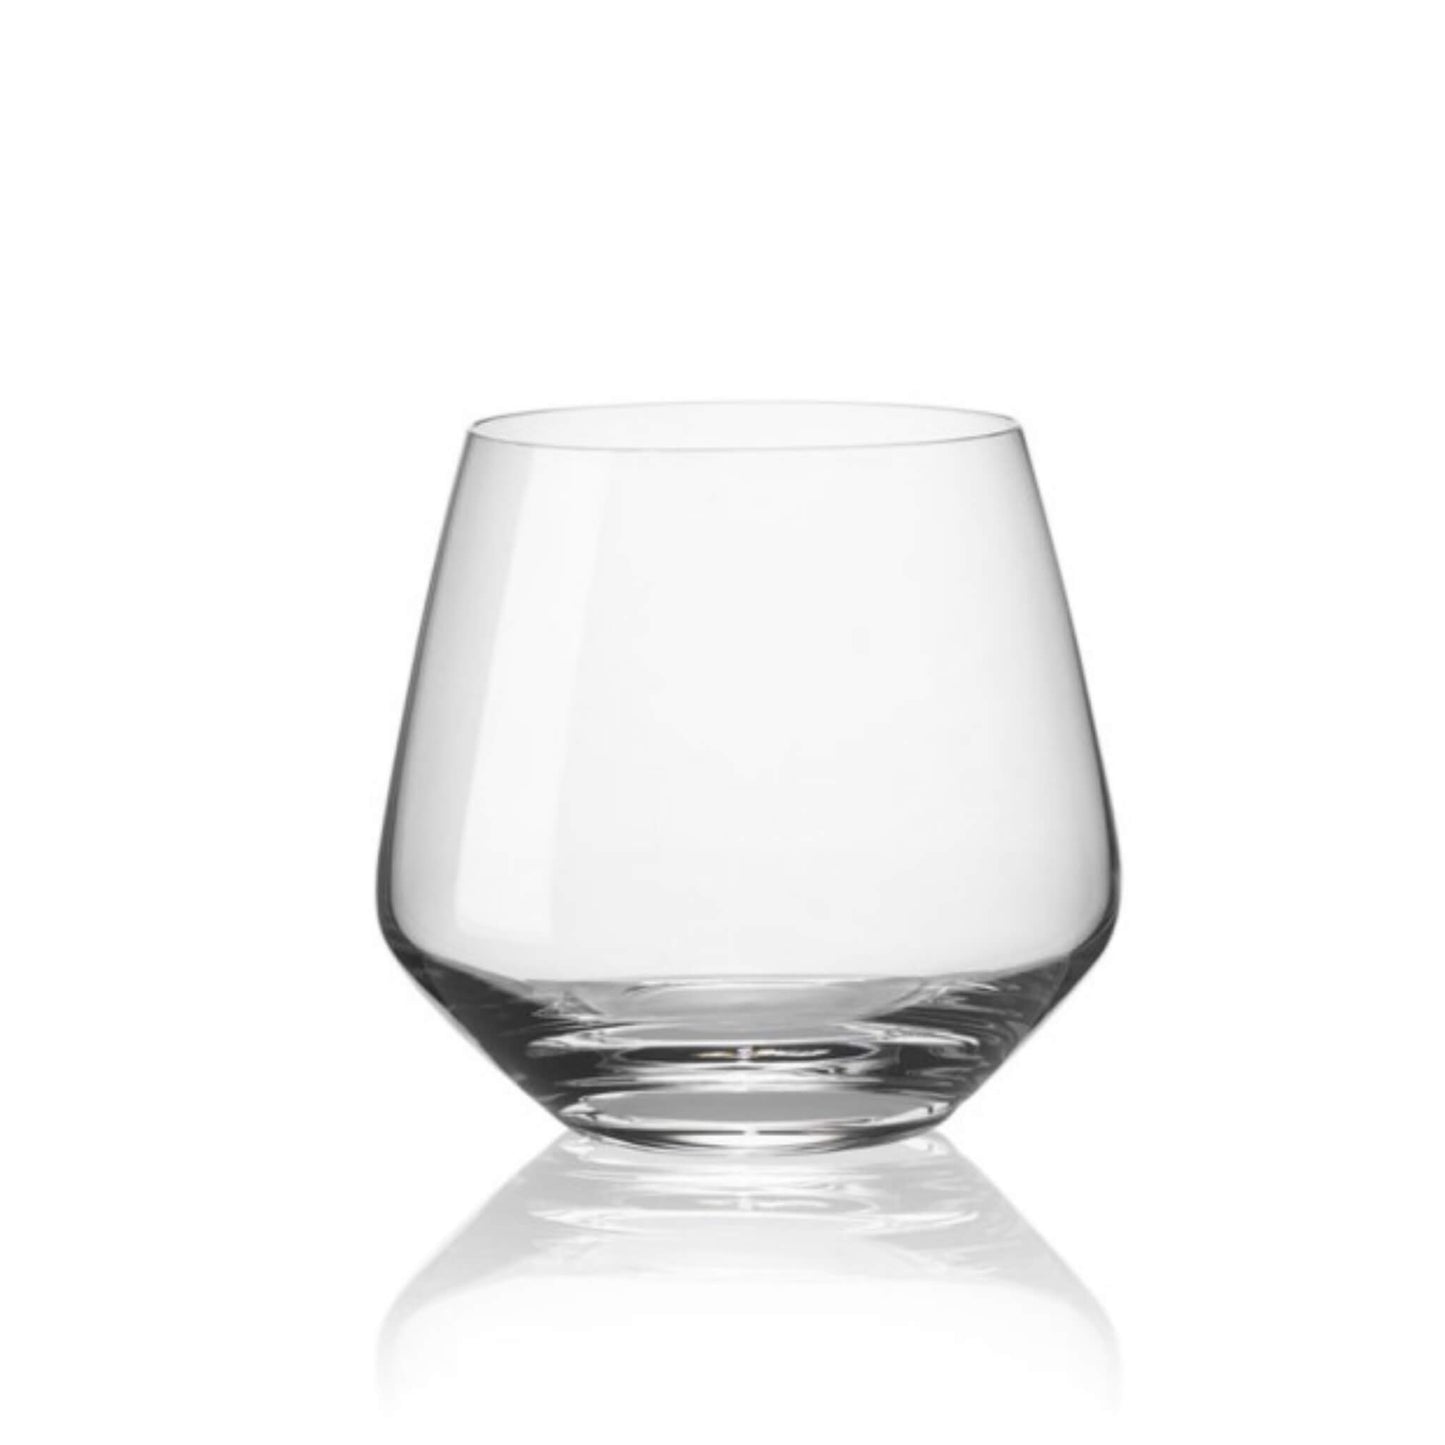 Lord crystalline drinking glasses - 39 cl 6 units - Unik by Nature